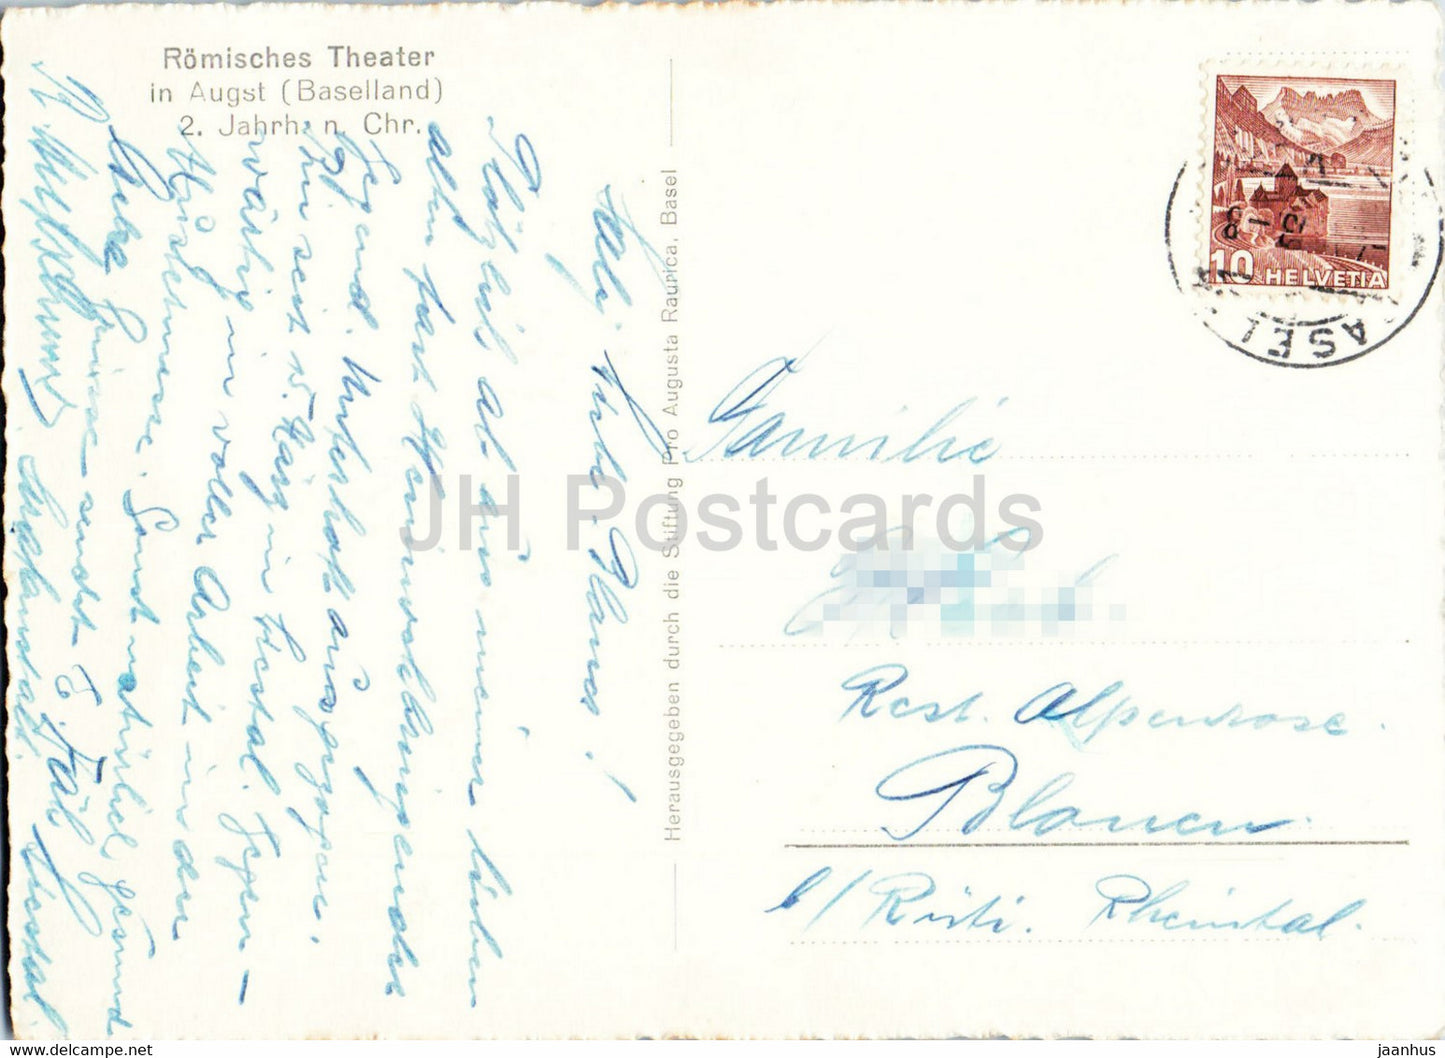 Romisches Theater in Augst (Baselland) - theatre - ancient world - old postcard - Switzerland - used